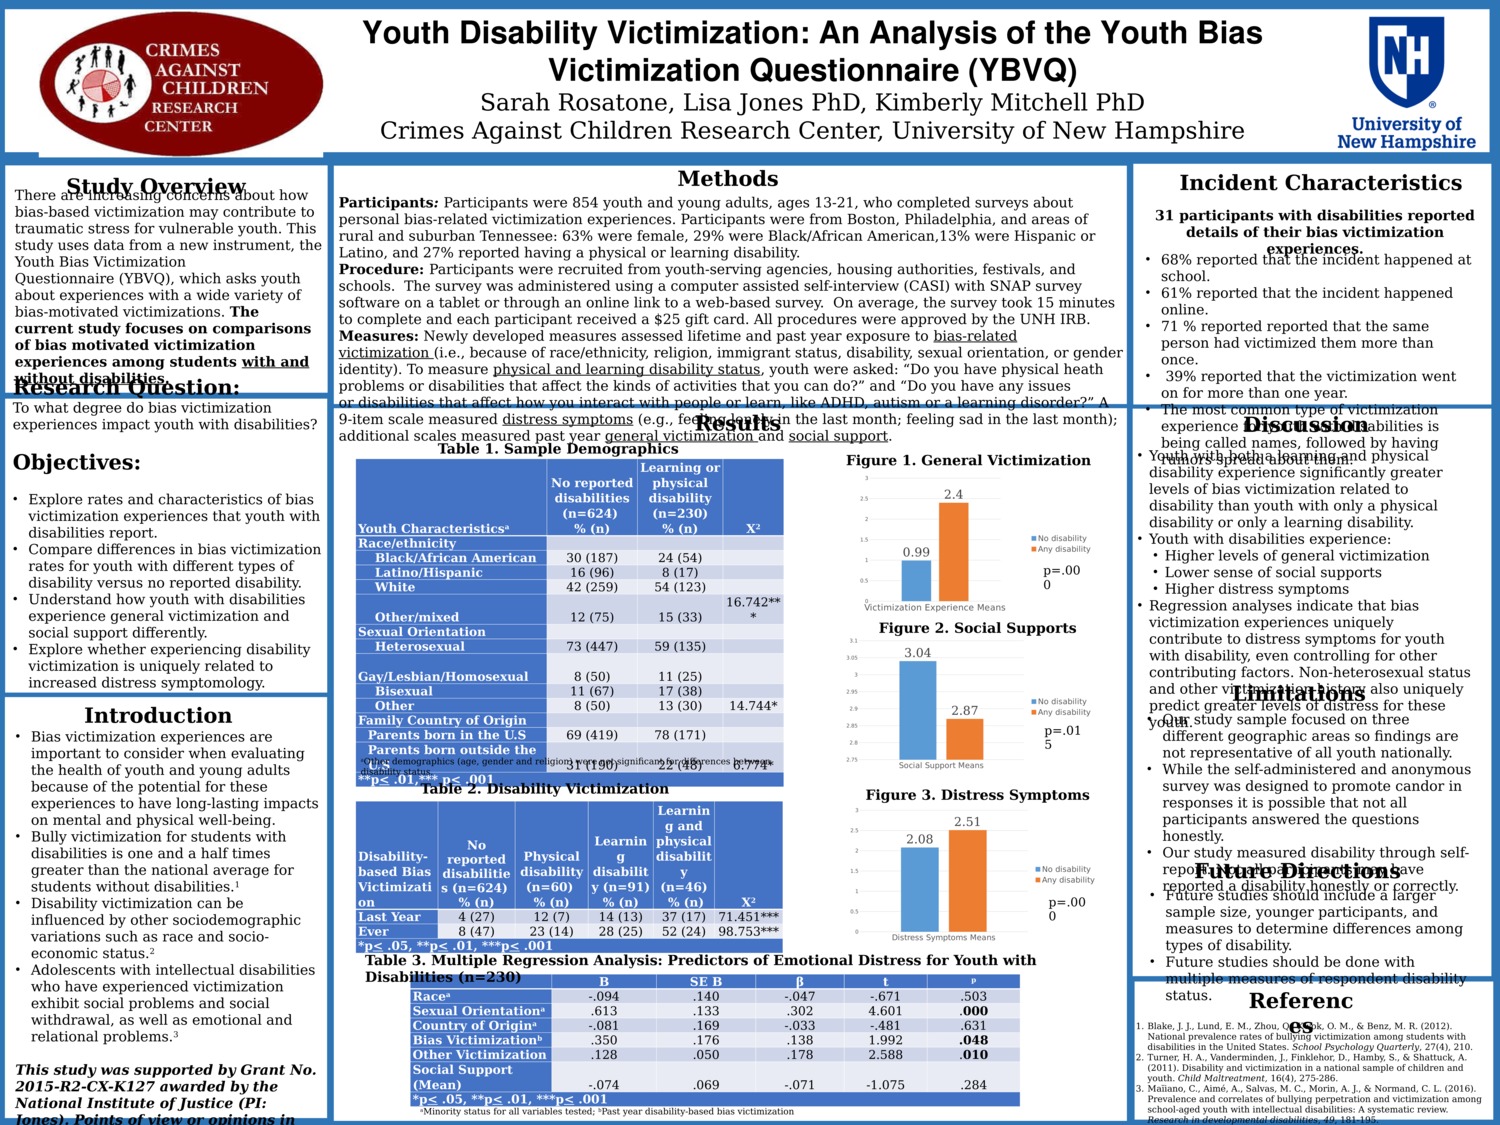 Youth Disability Victimization: An Analysis Of The Youth Bias Victimization Questionnaire (Ybvq) by sr1079